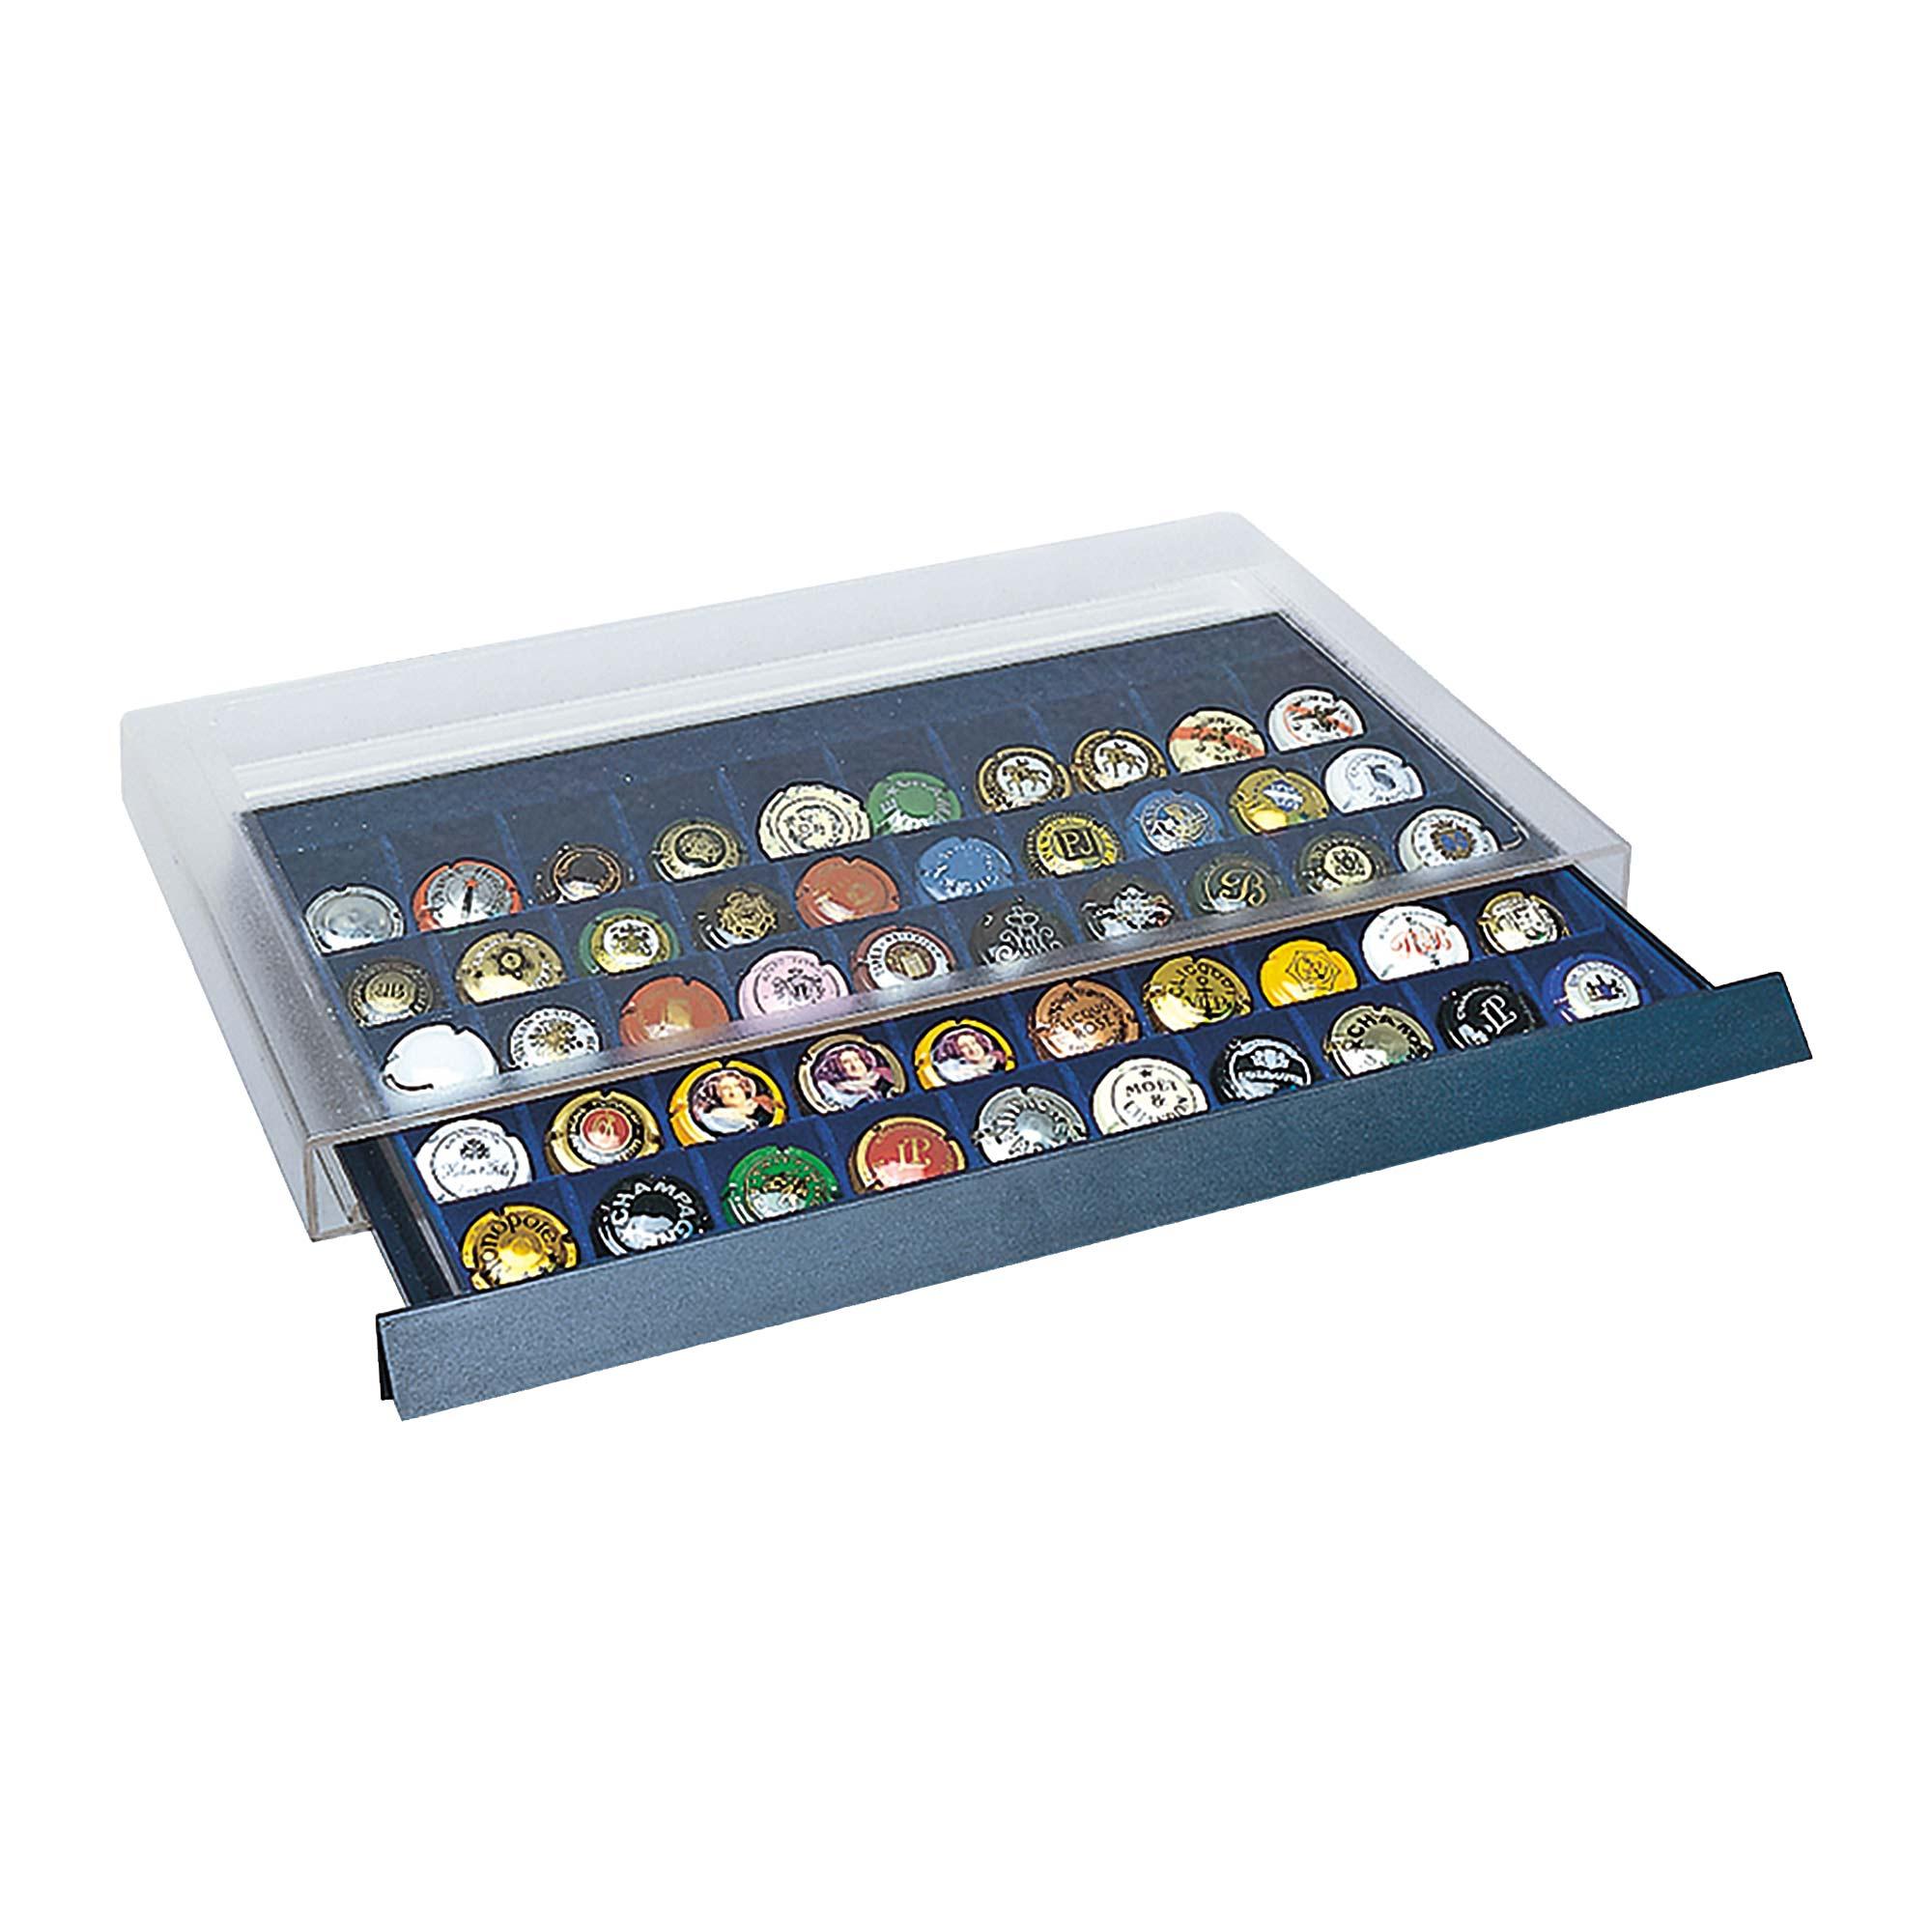 Stackable Coin Tray 50 spaces up to 30mm